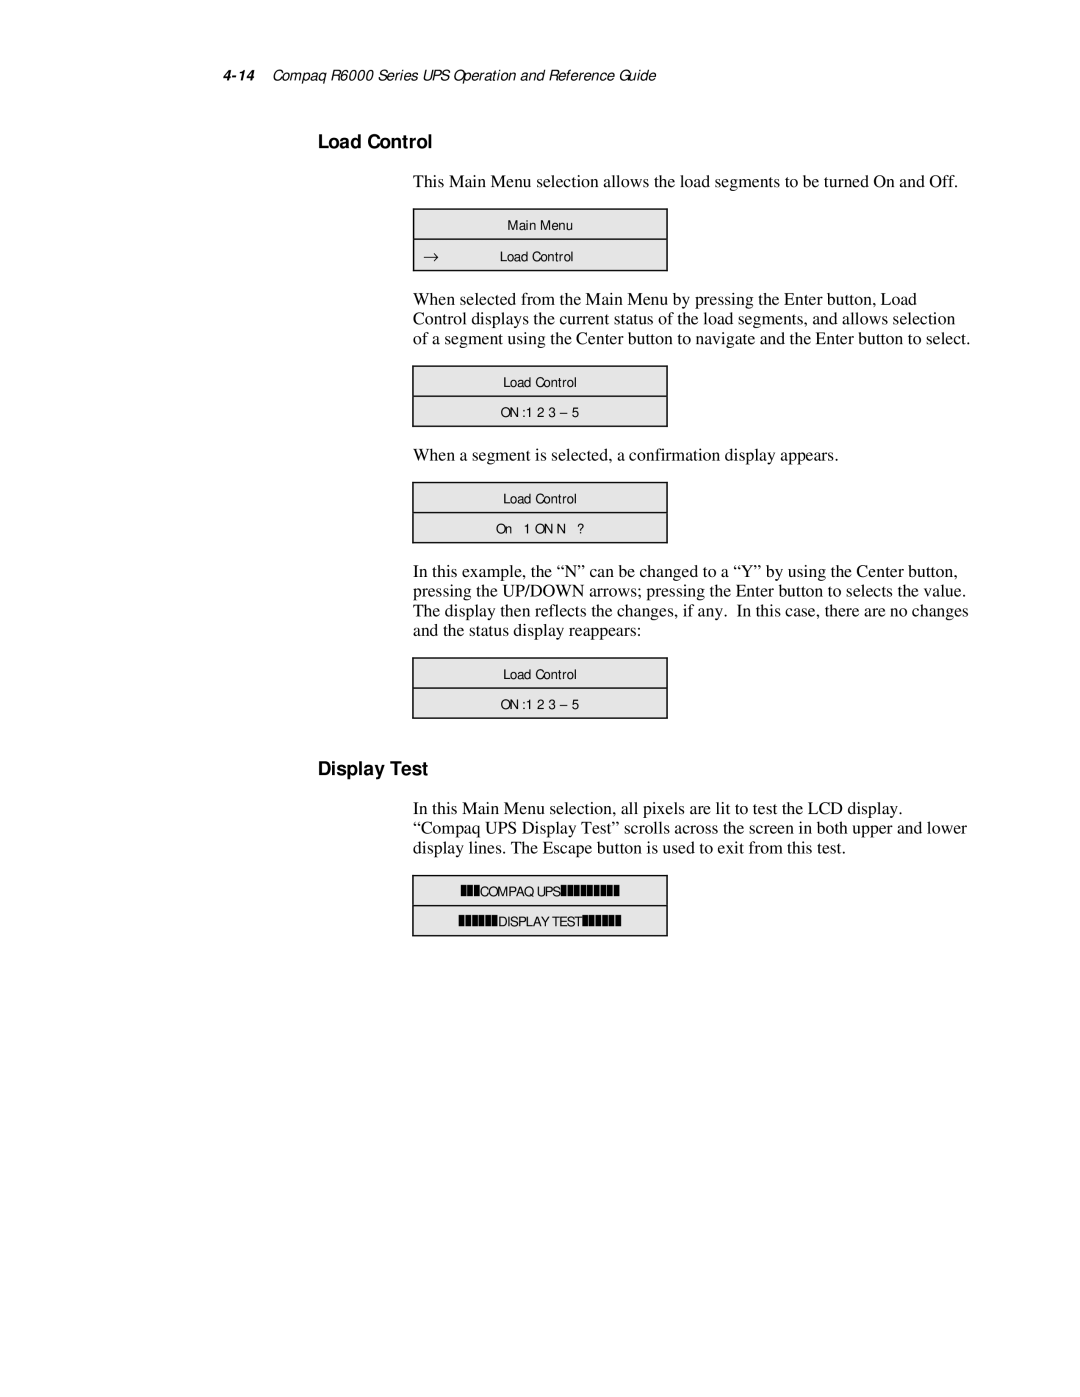 Compaq manual Load Control, Display Test, Compaq R6000 Series UPS Operation and Reference Guide 